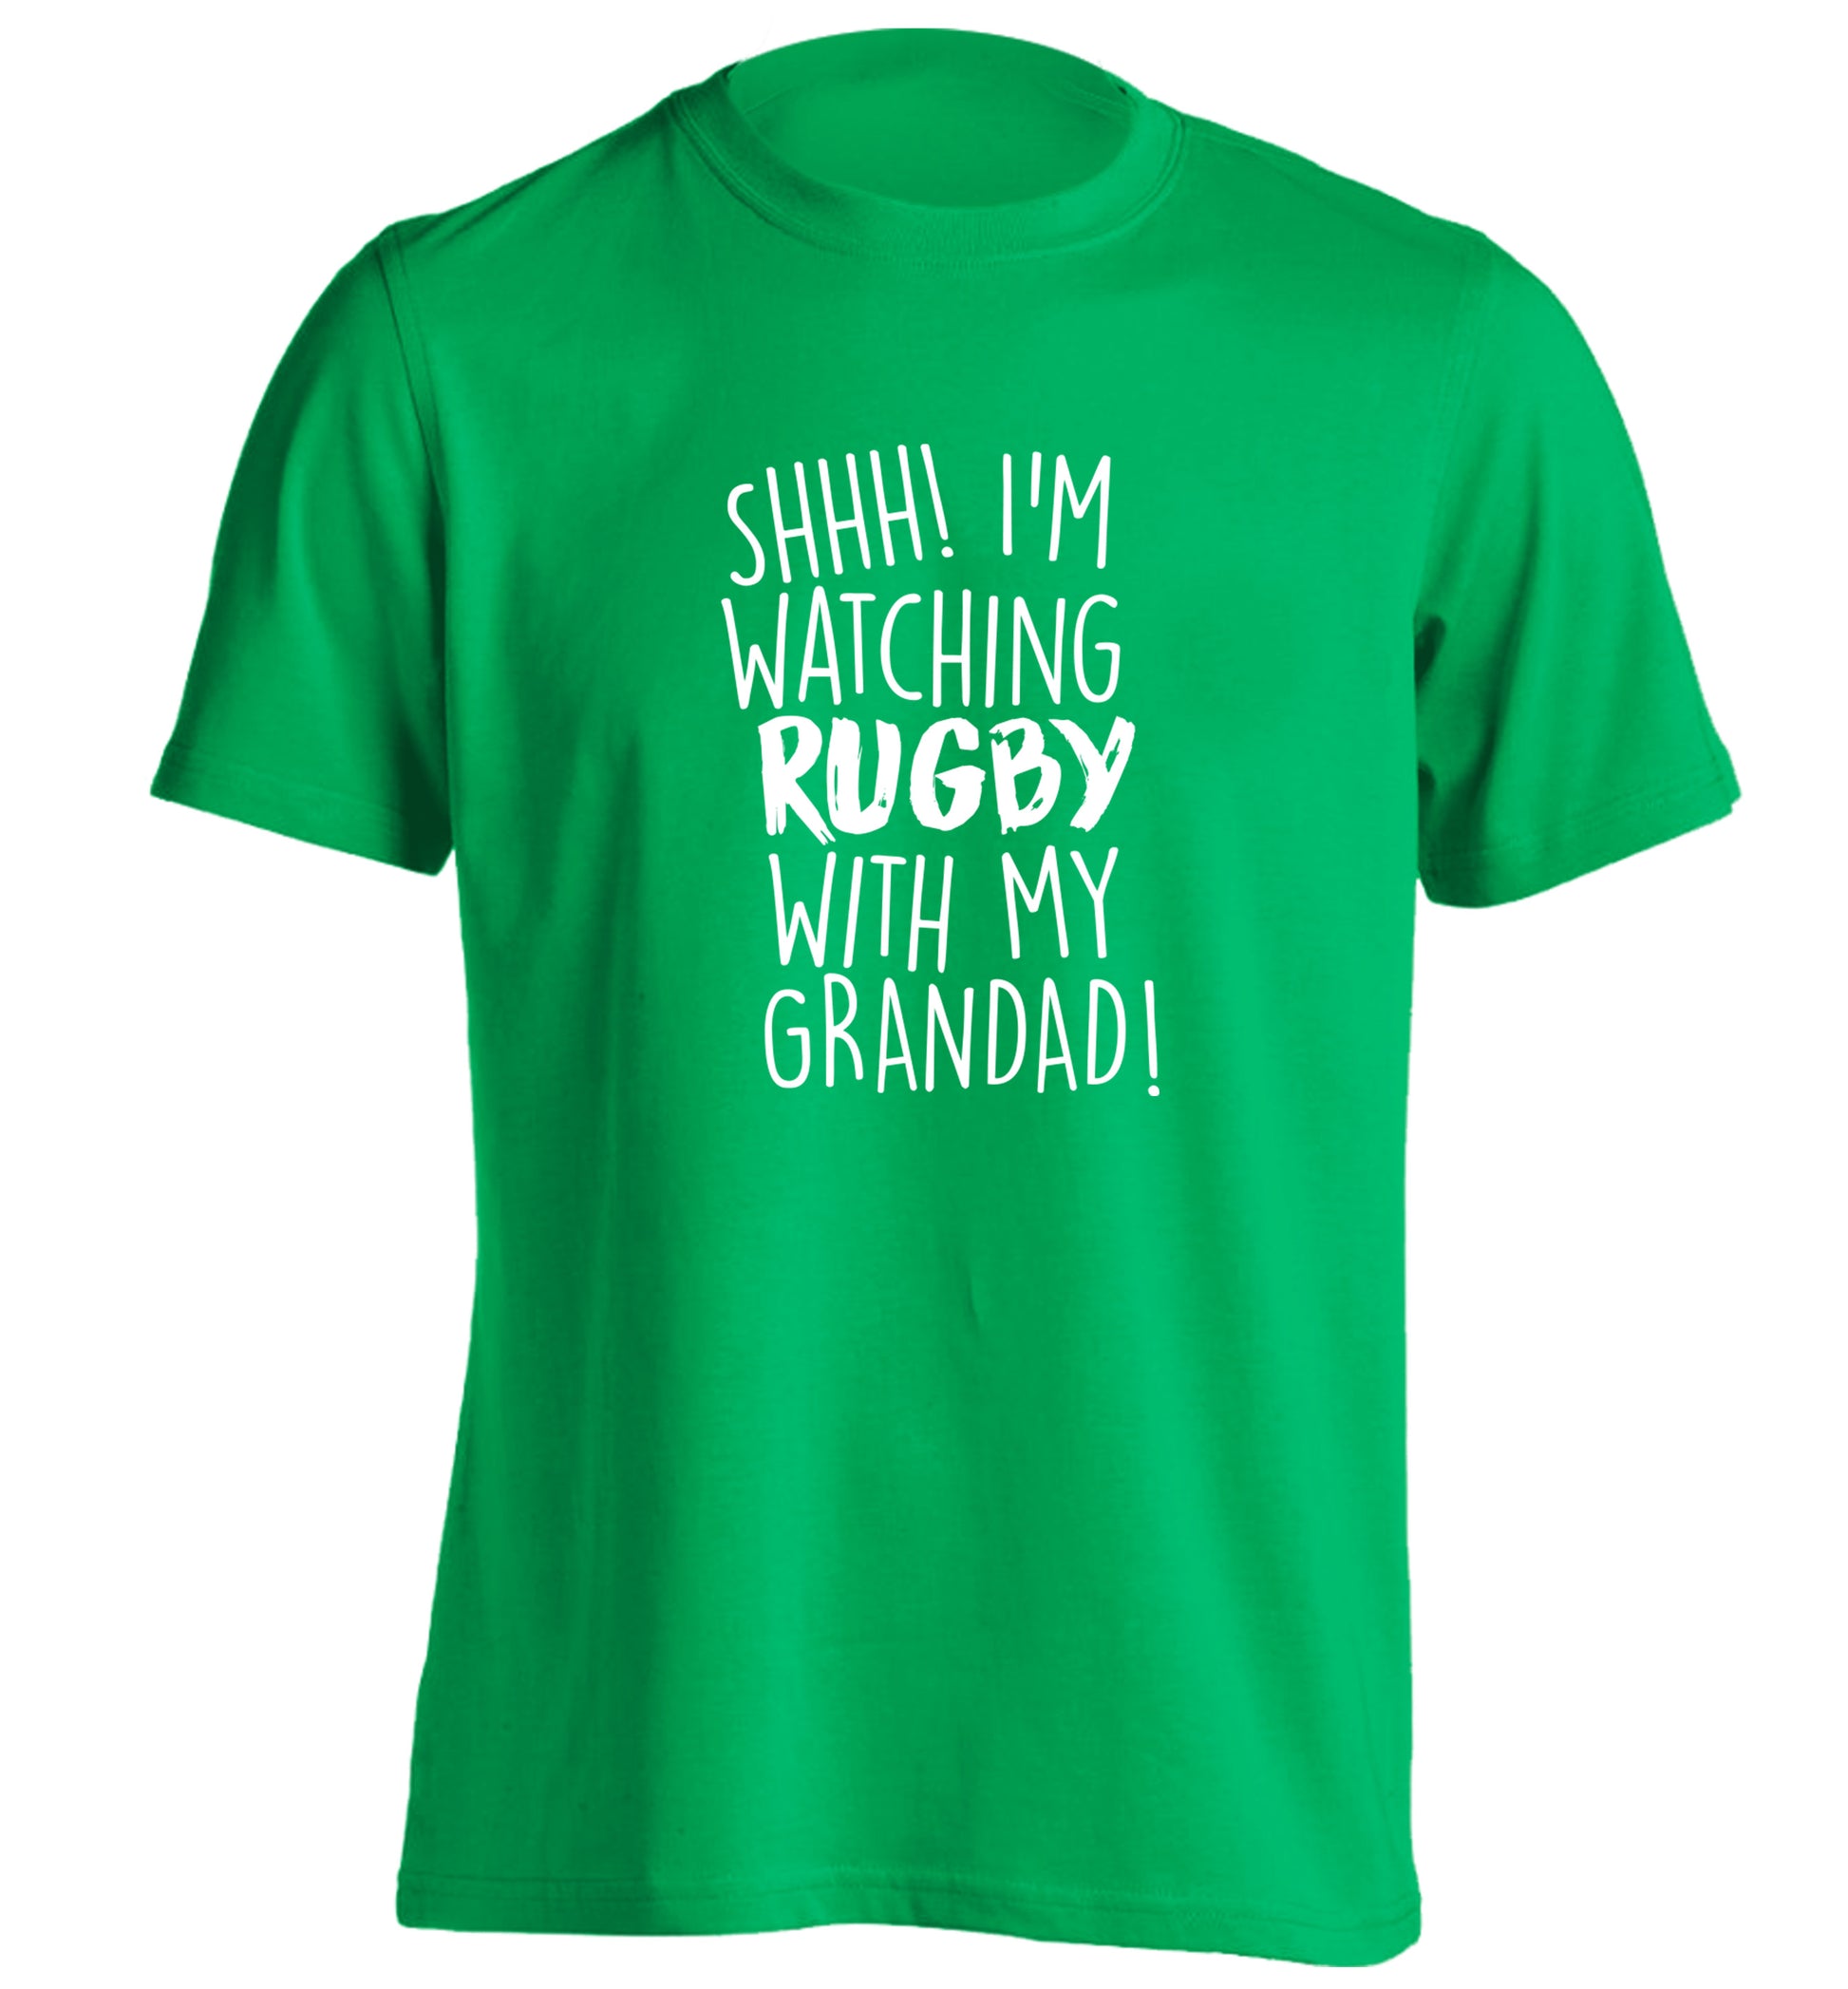 Shh I'm watching rugby with my grandaughter adults unisex green Tshirt 2XL